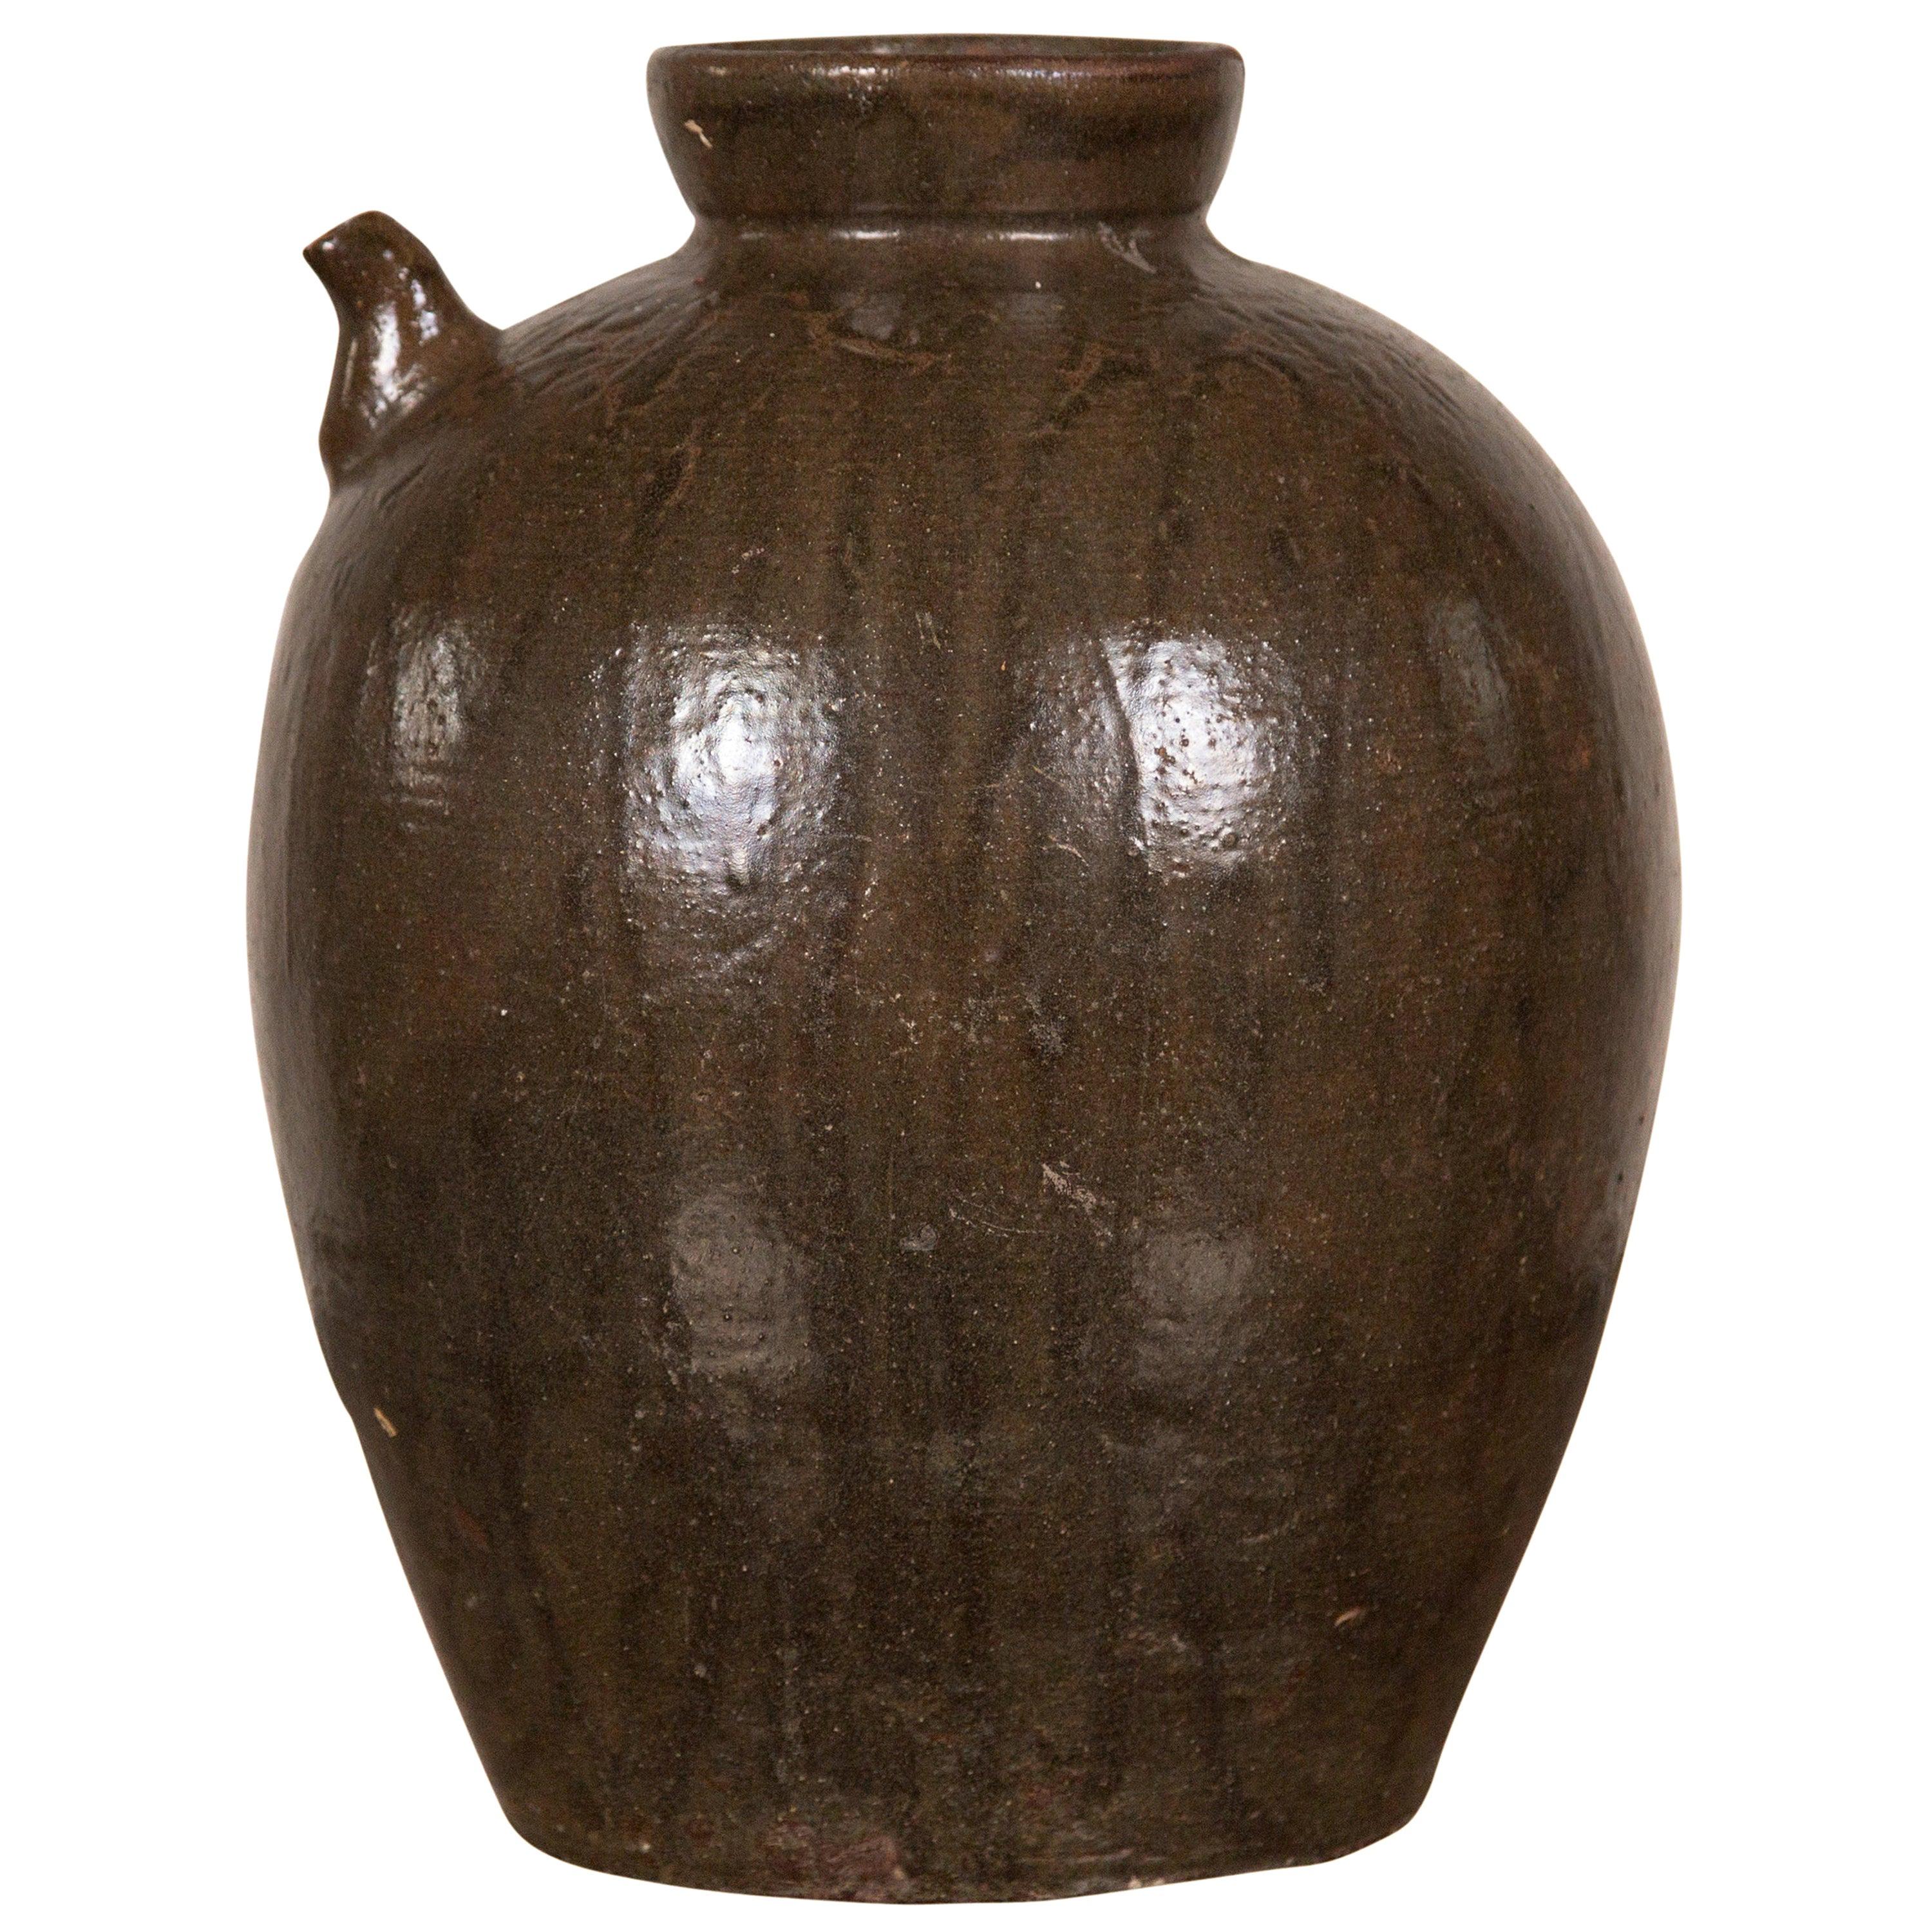 Chinese Qing Dynasty Glazed Water Jug with Petite Spout from the 19th Century